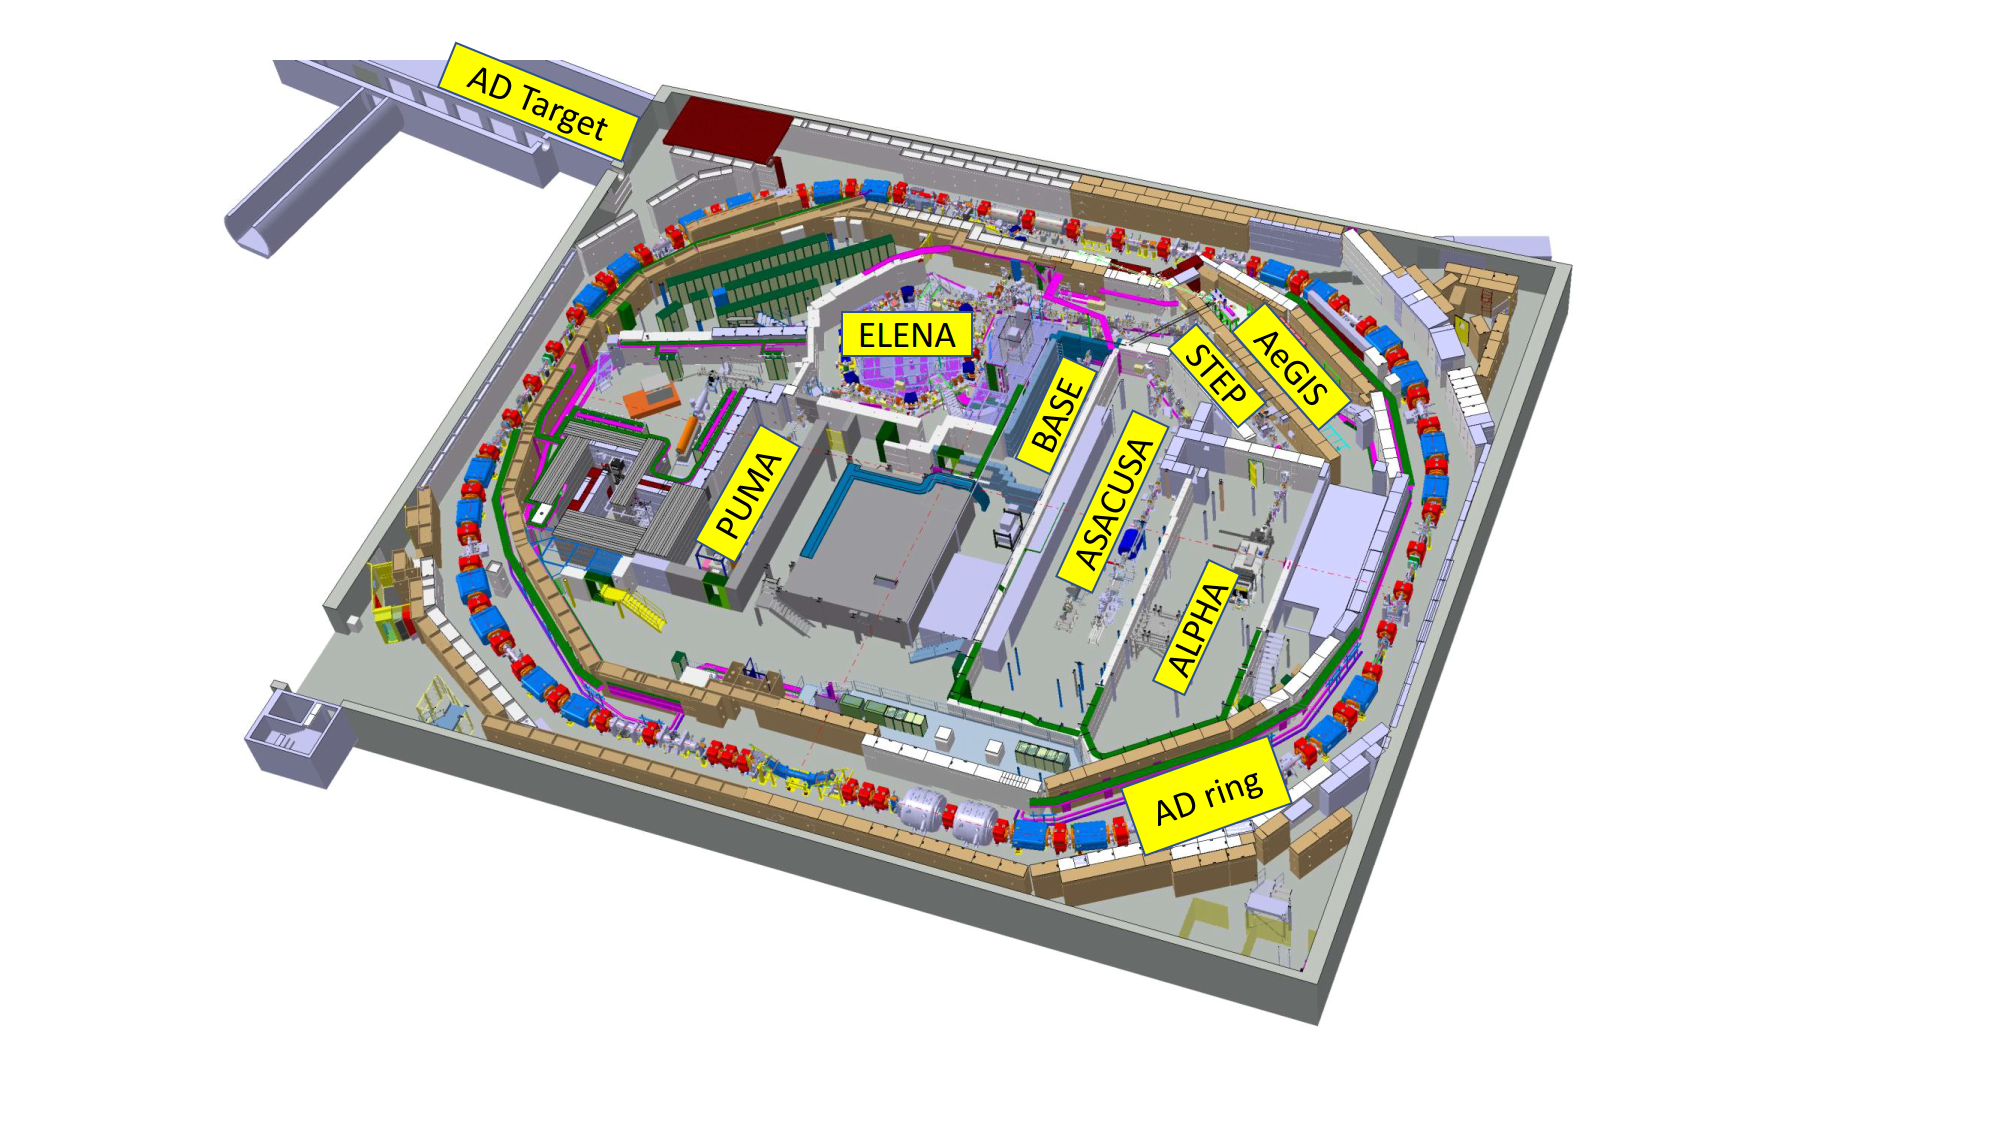 3D representation of AD Hall and location of experiments